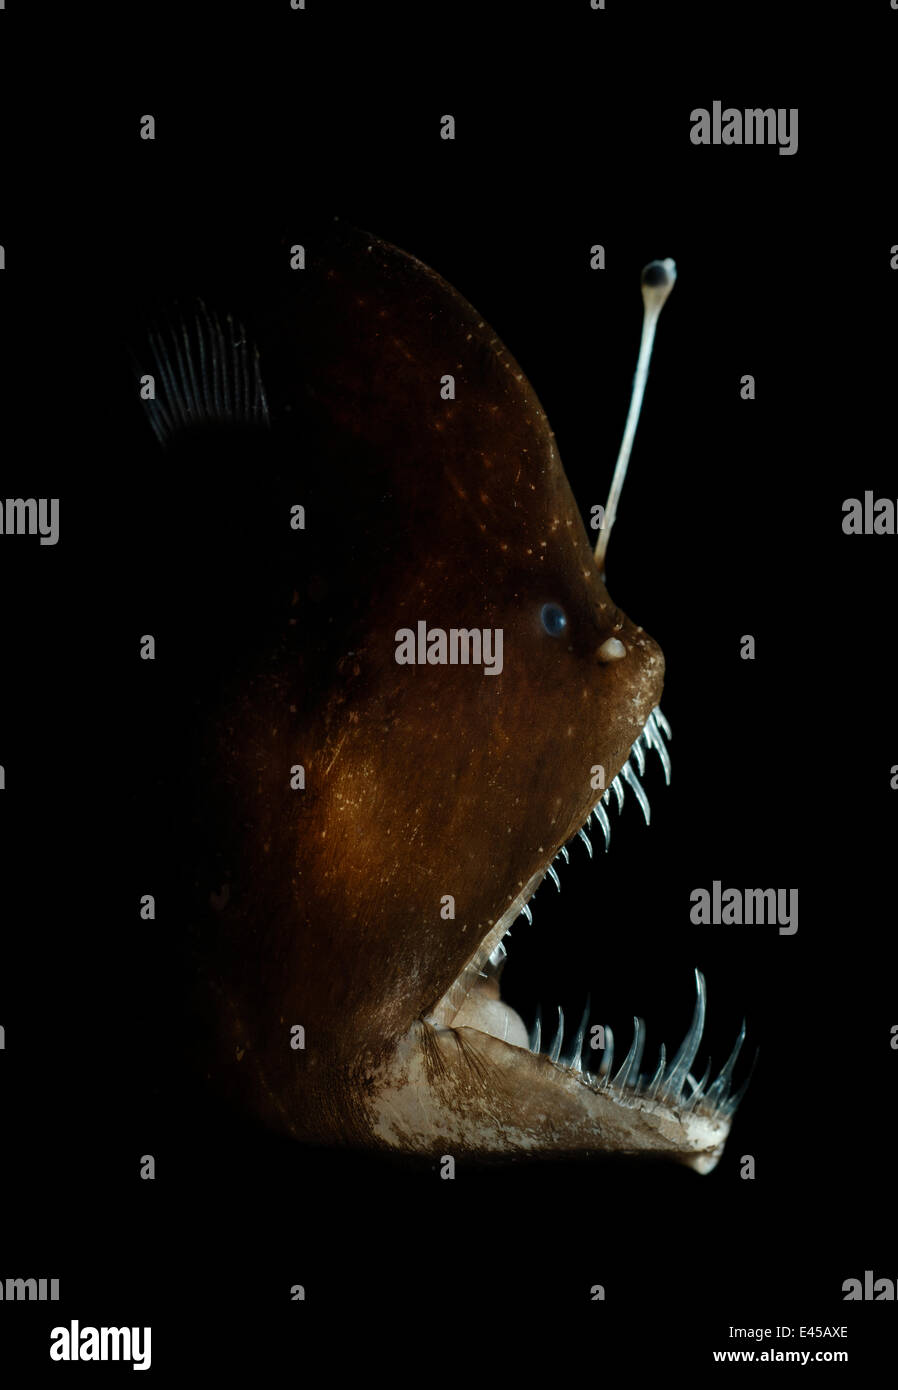 Murrays abyssal anglerfish (Melanocetus murrayi) Atlantic ocean. A deep-sea fish with bioluminescent lure used to attract prey. The bioluminescence is produced by symbiotic bacteria; these bacteria are thought to enter the esca via an external duct. Stock Photo